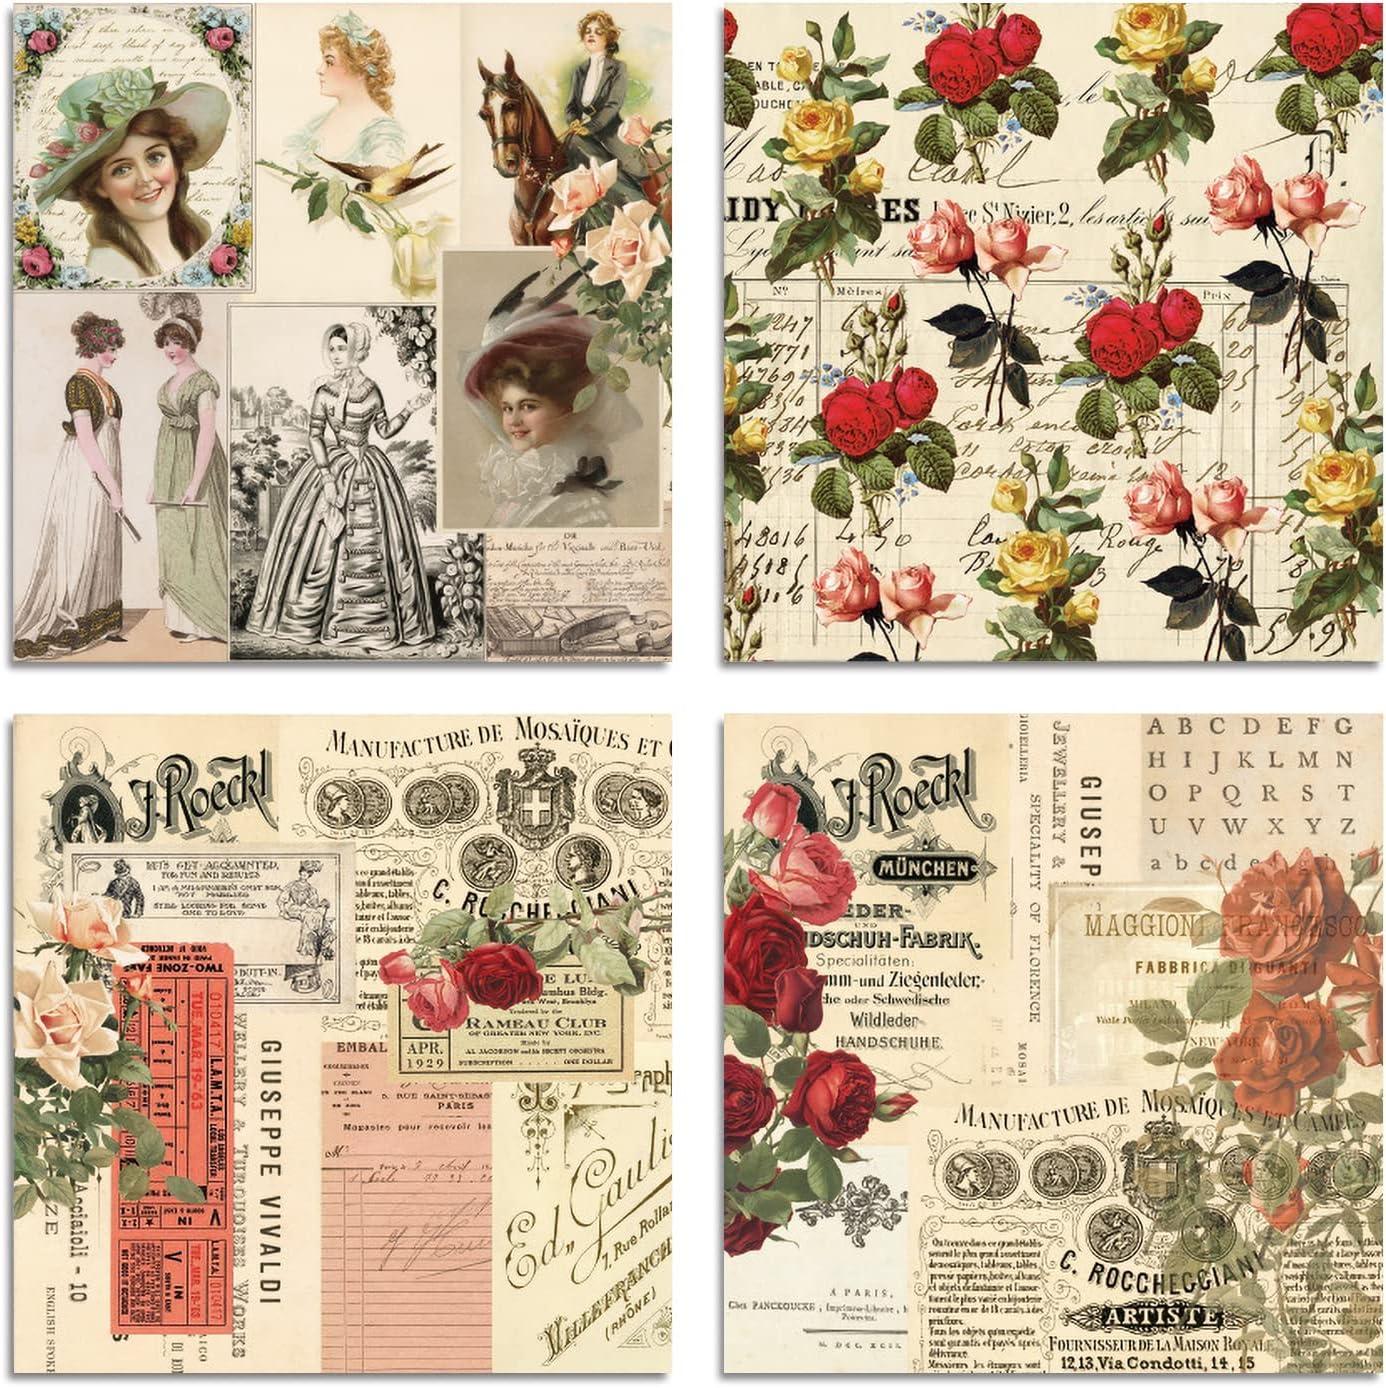  Scrapbooking Paper 12 x 12 Inch, 24 Sheets Craft Scrapbook  Paper Pad, Single-Side Printing Cardstock Paper Supplies for Crafting Card  Making Decorative Background Art Album (Nature) : Arts, Crafts & Sewing